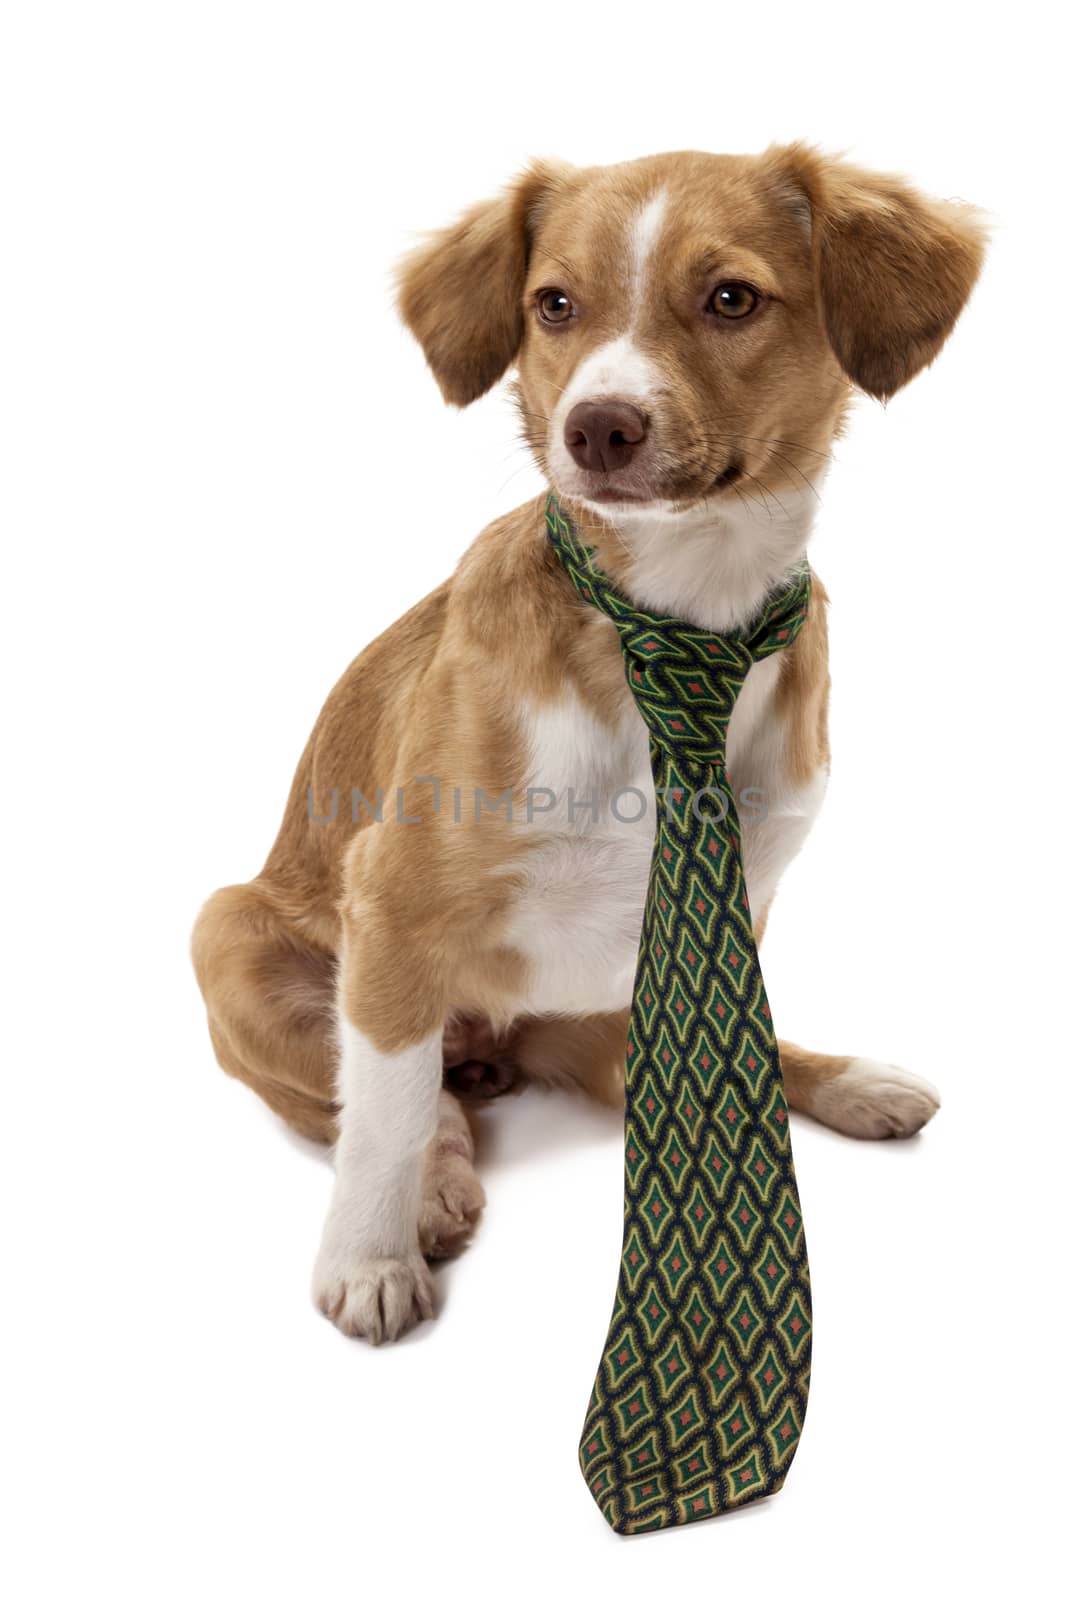 Cute dog wearing necktie isolated over white background